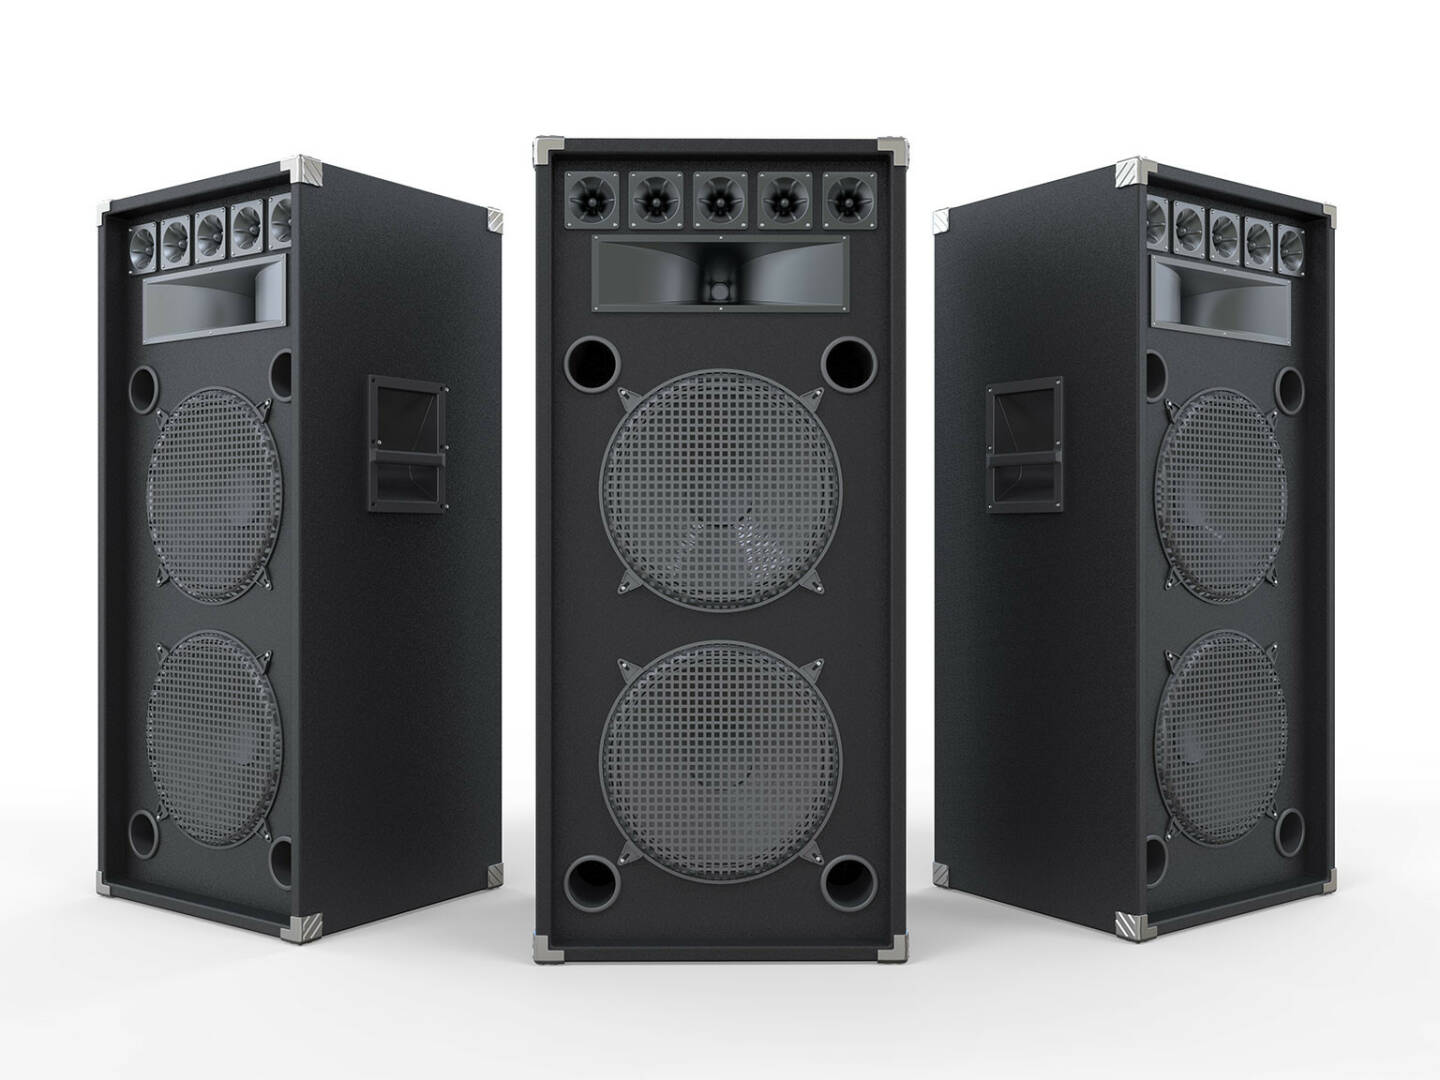 http://www.shutterstock.com/de/pic-138673286/stock-photo-large-audio-speakers-isolated-on-white-background.html